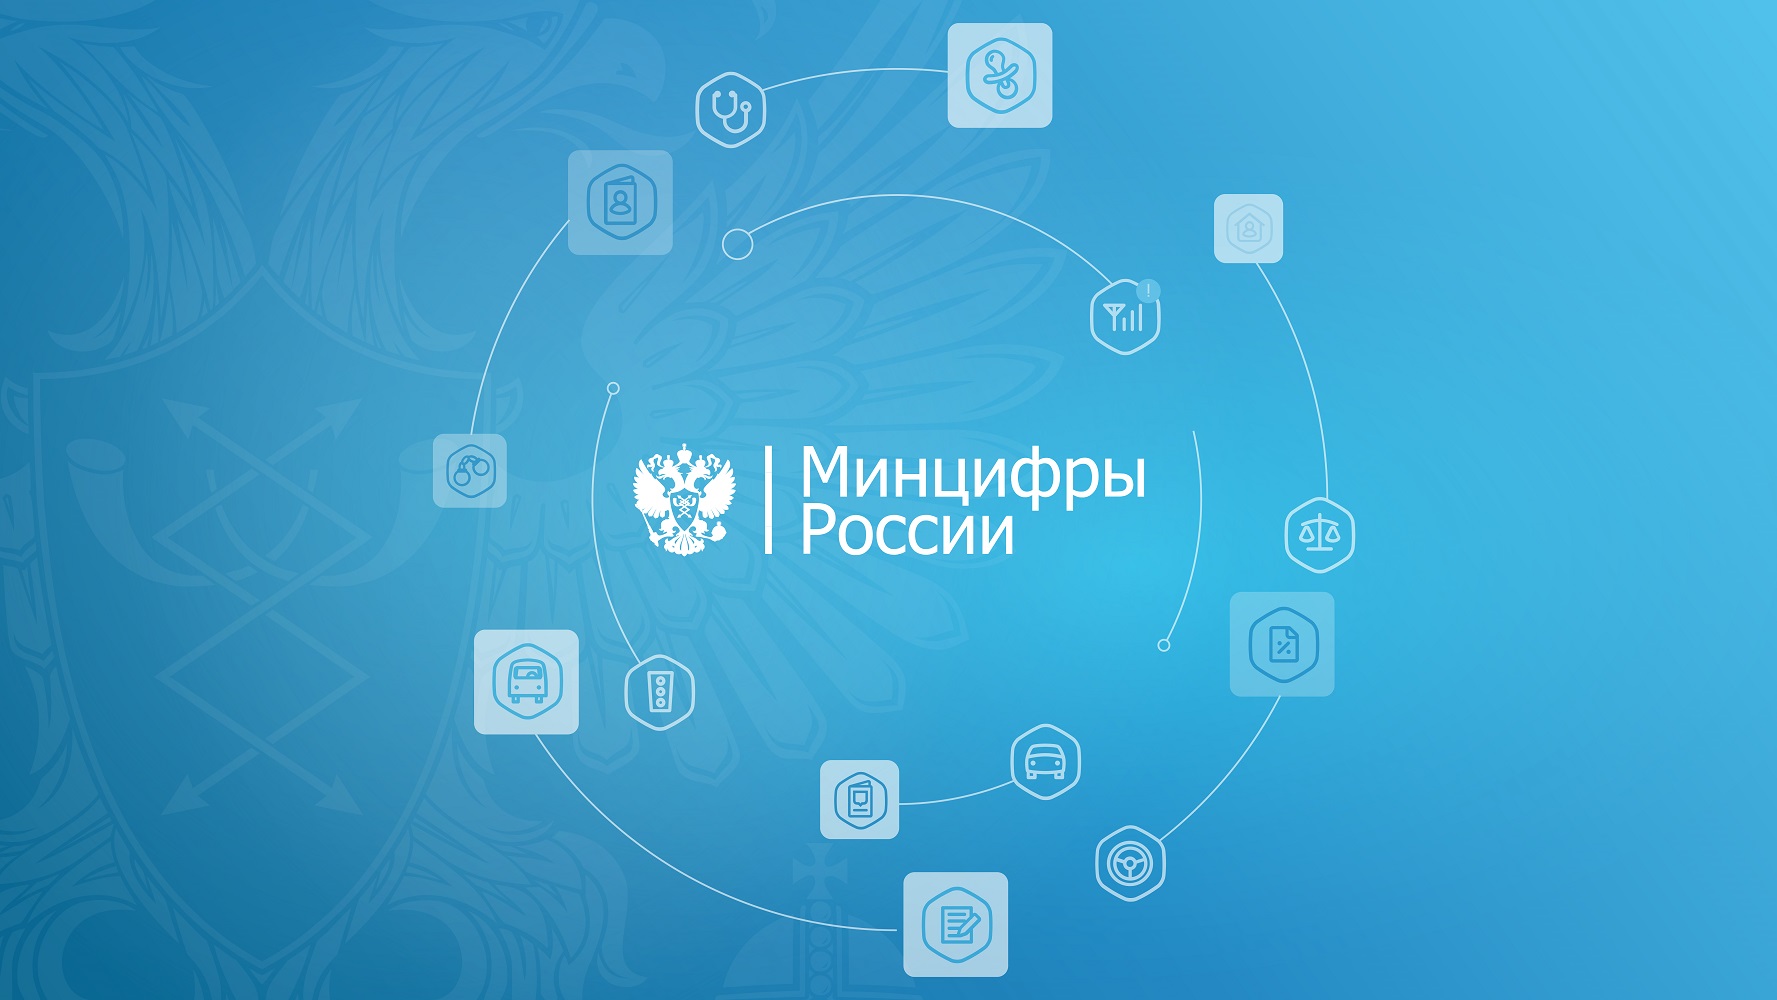 Russian Ministry of Digital Development will coordinate development of production and communication technologies